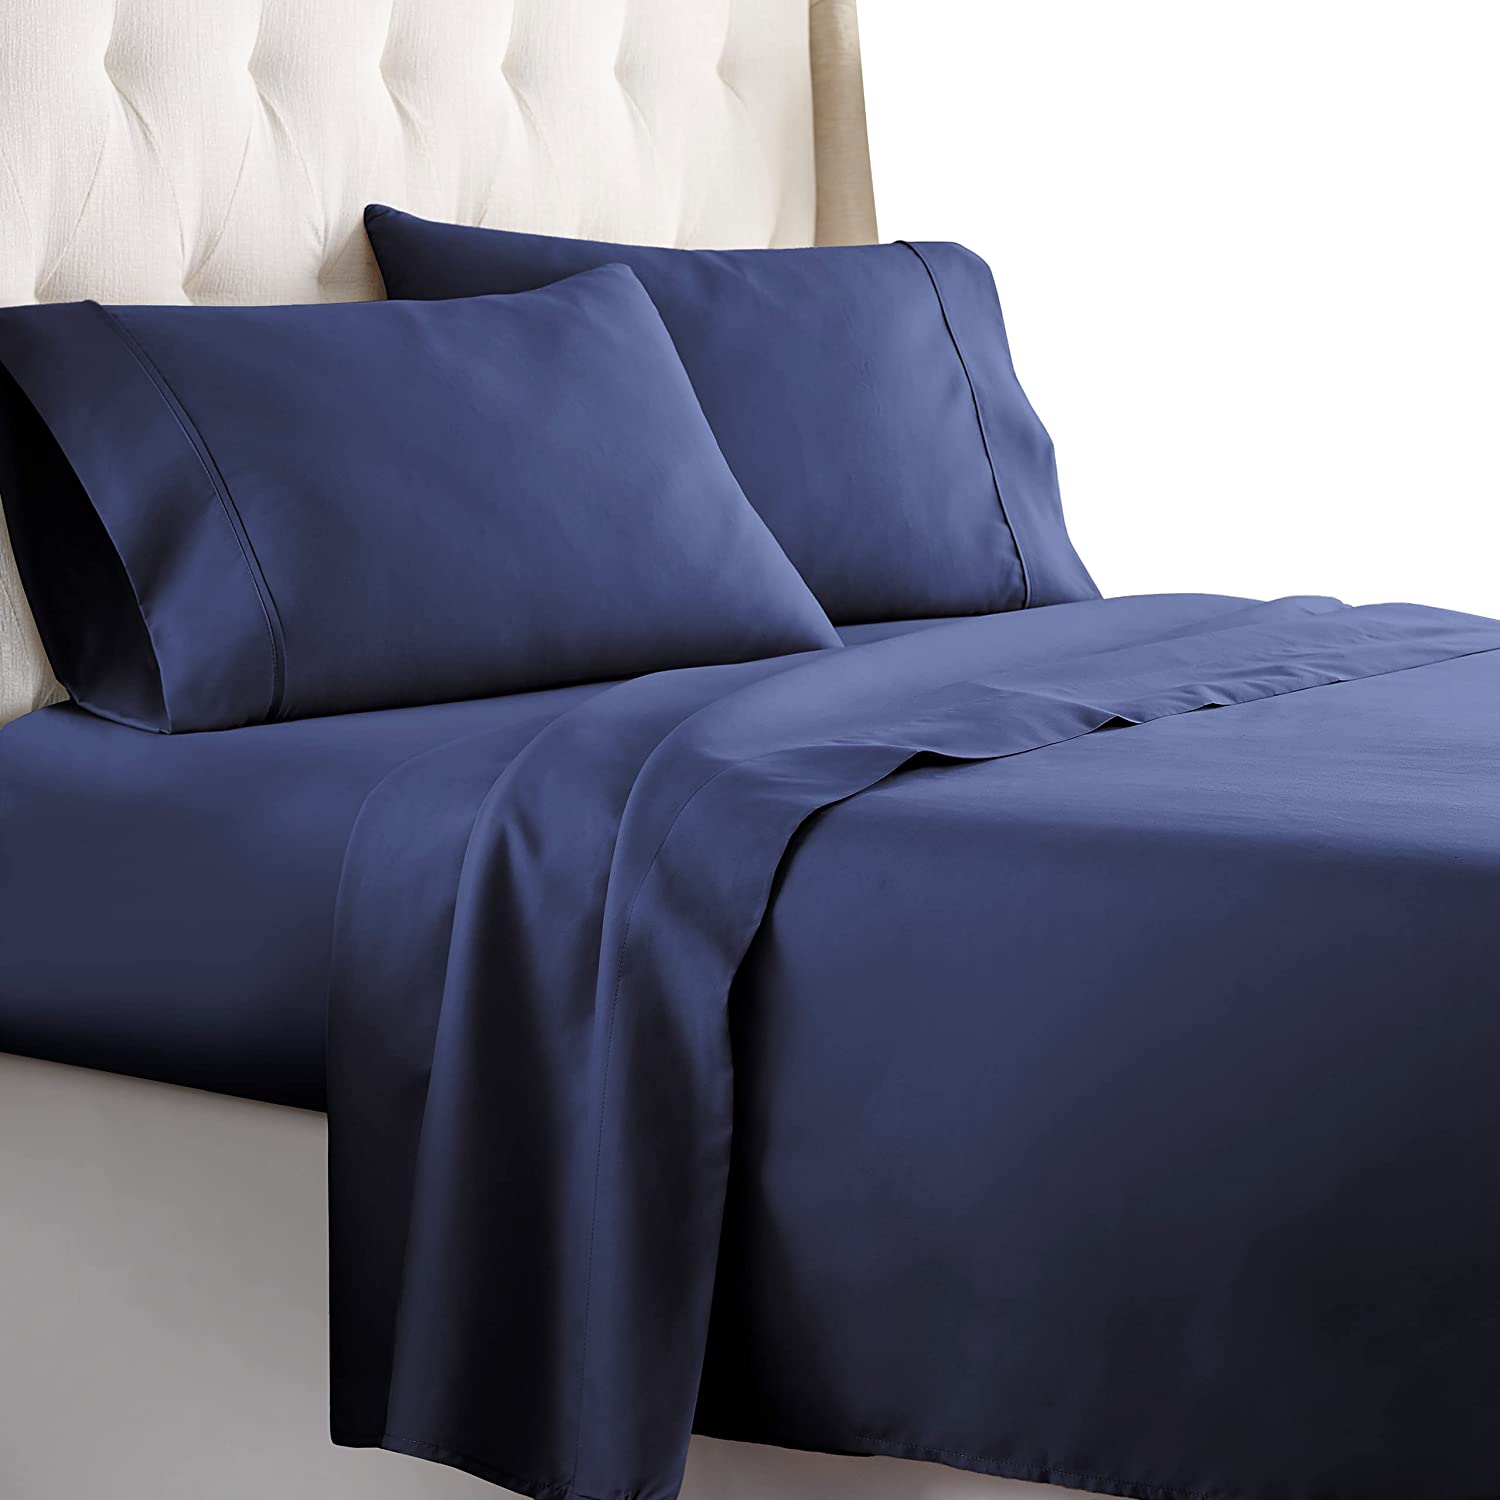 Buy Egyptian Cotton 1000 Thread Count Navy Blue Sheet Set at Egyptianhomelinens.com